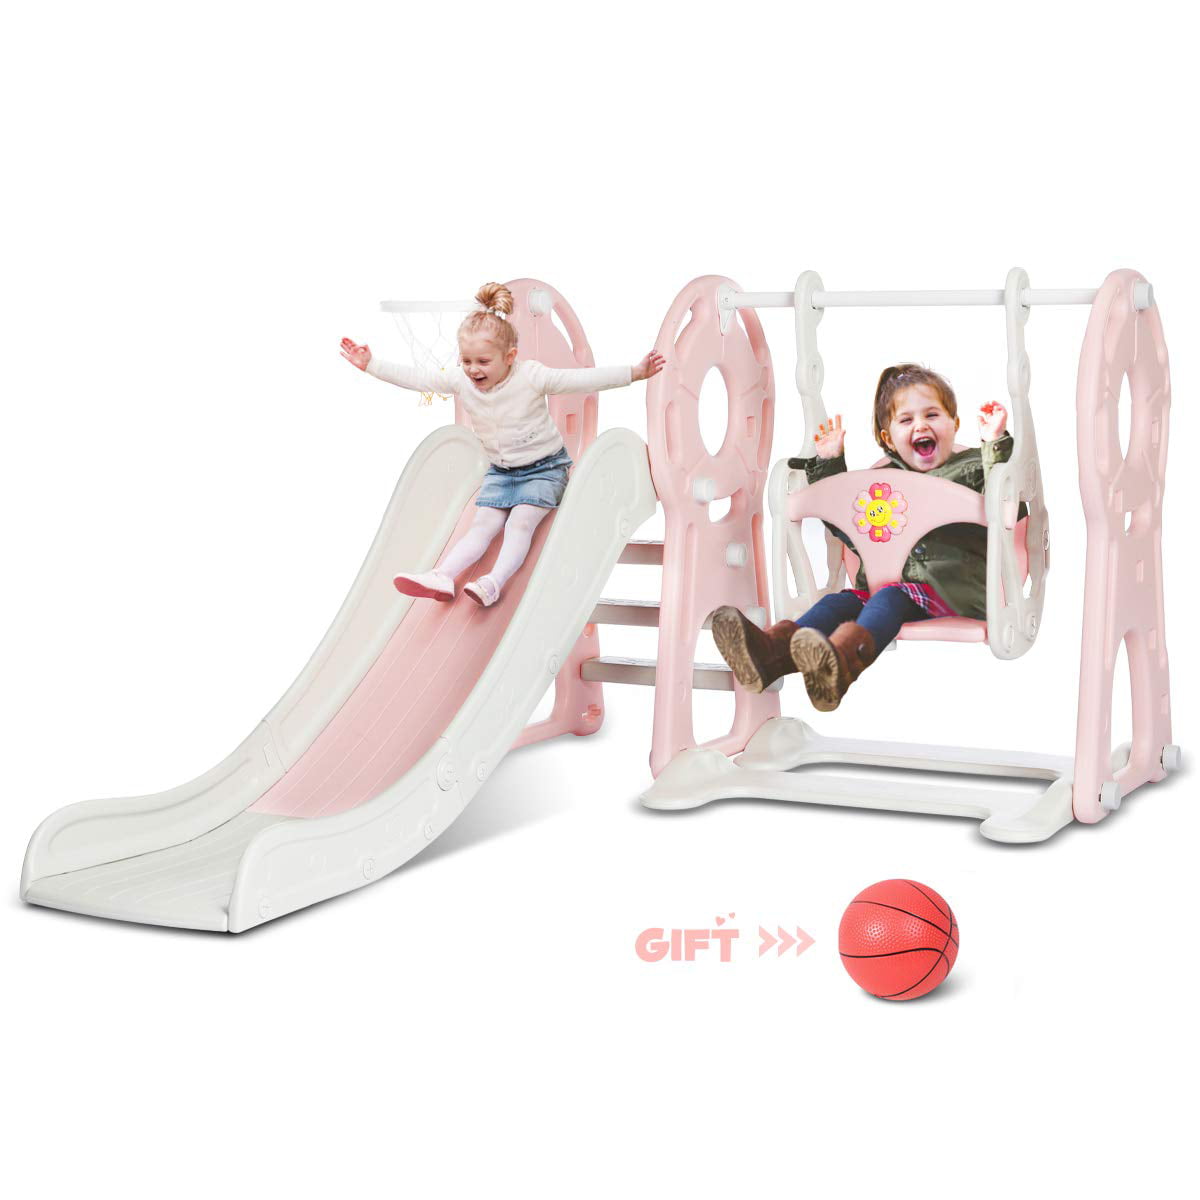 Toddler Climber and Swing Set Football Gate 6 in 1 Kids Indoor & Outdoor Slide Swing Playset W/Basketball Hoop Baseball Bat from US, Multicolour Easy Climb Stairs for Infant Playground Games